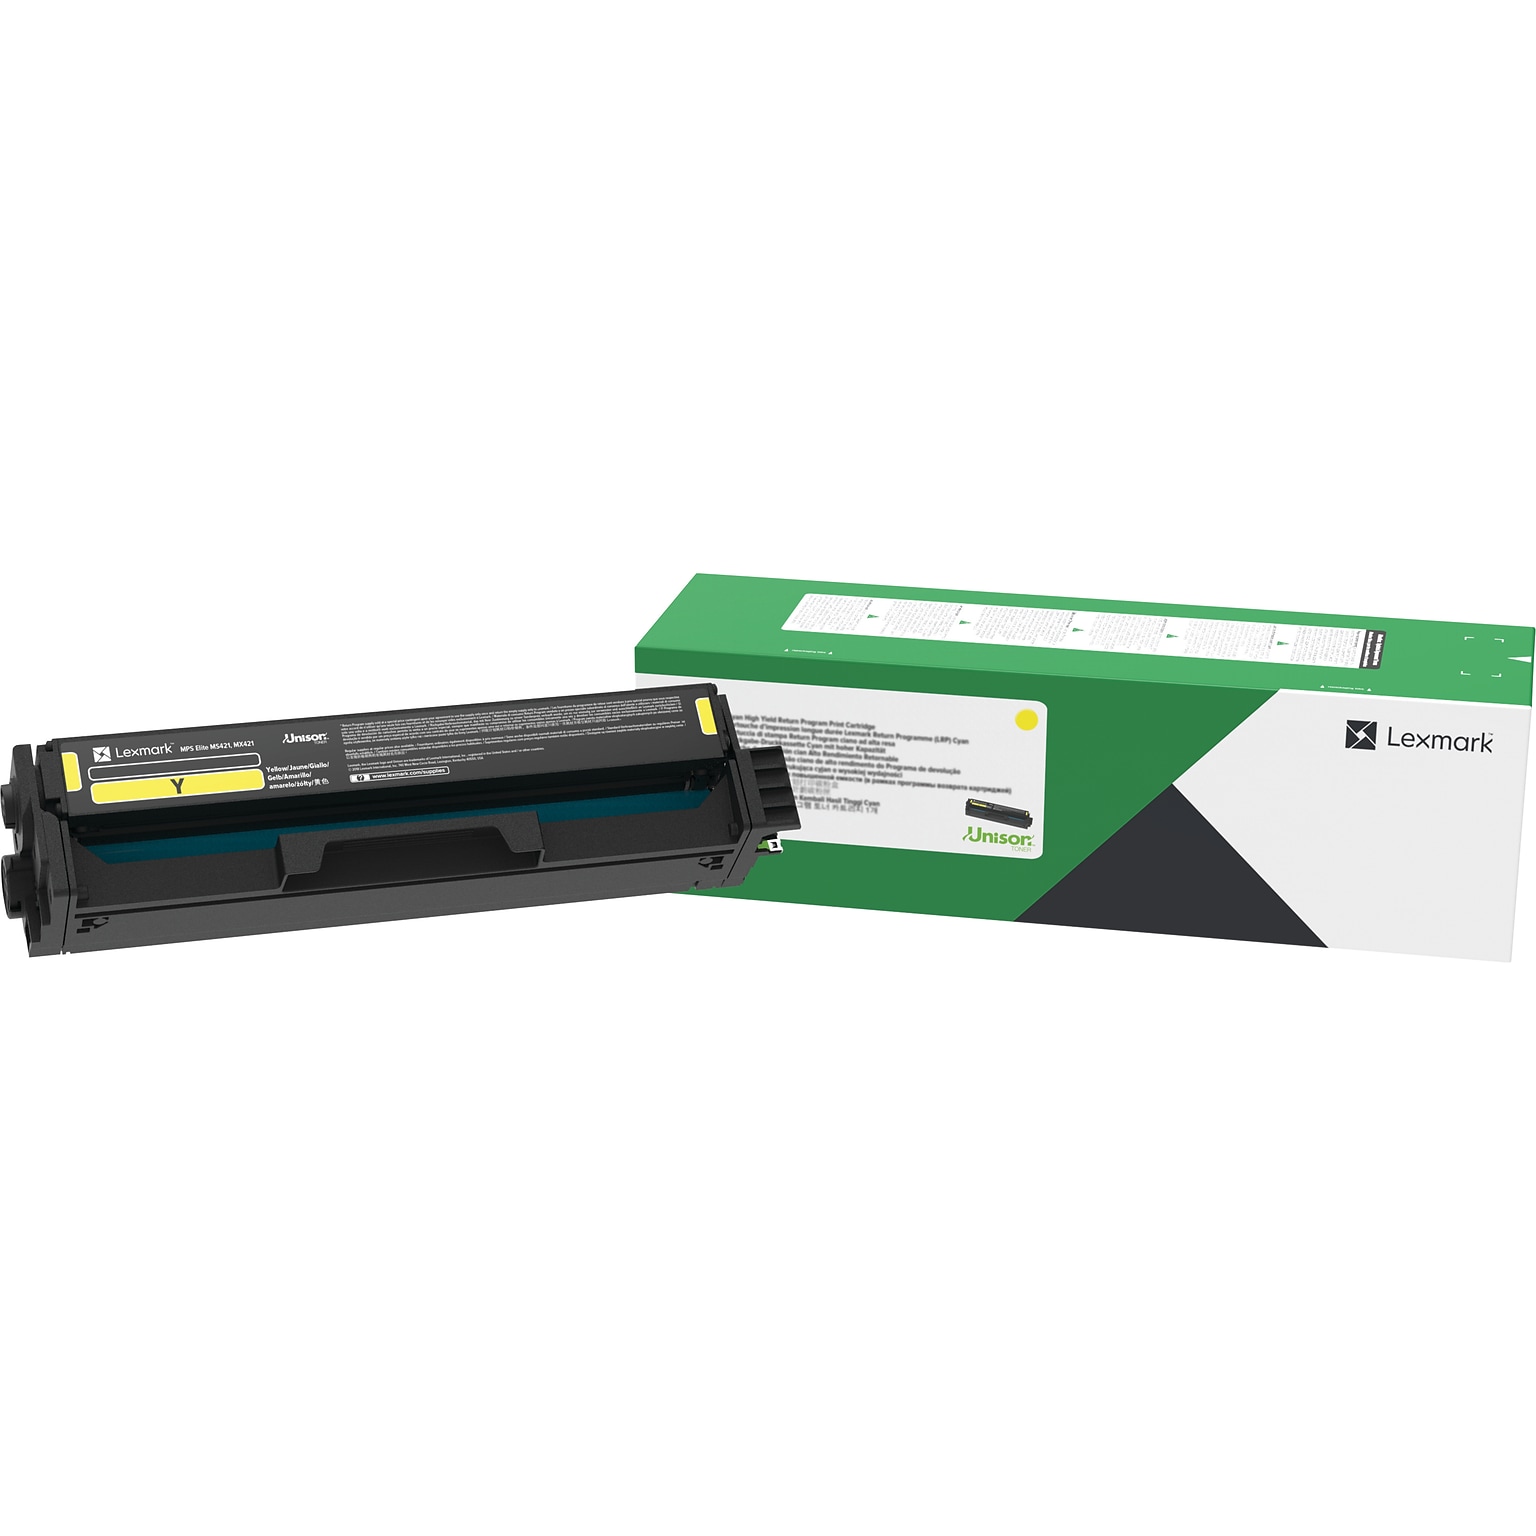 Lexmark C341XY0 Yellow Extra High Yield Toner Cartridge, Prints Up to 4,500 Pages